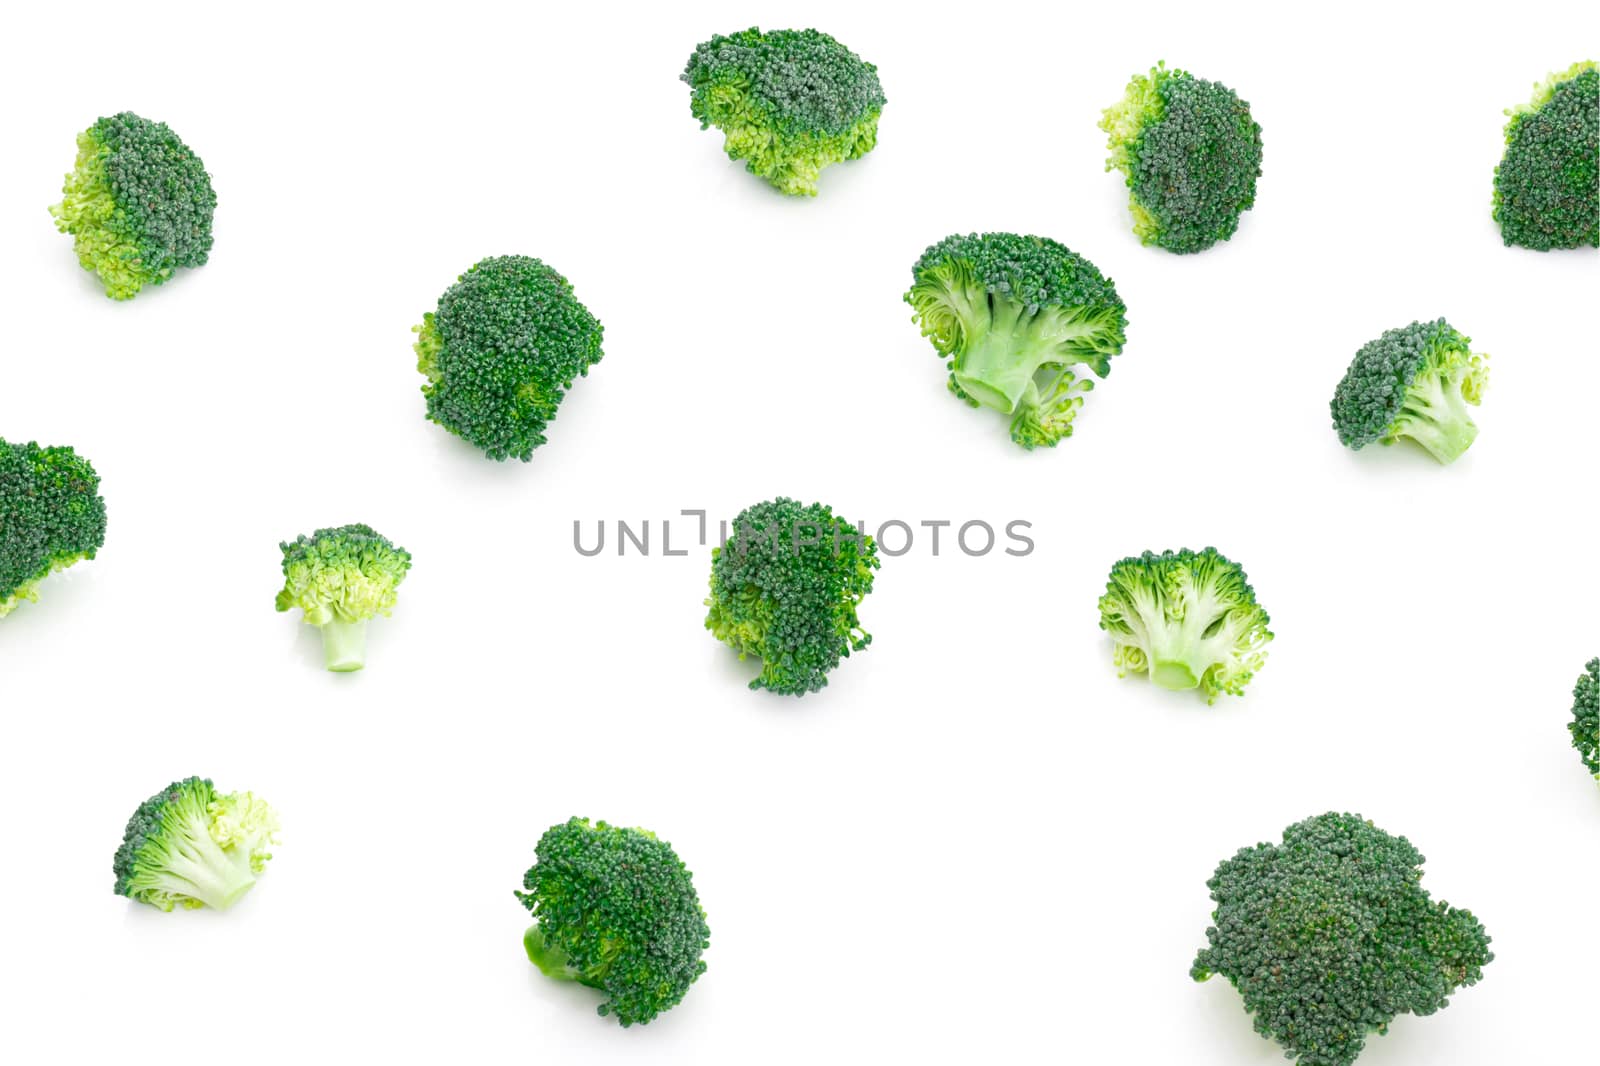 Broccoli vegetable on a white background